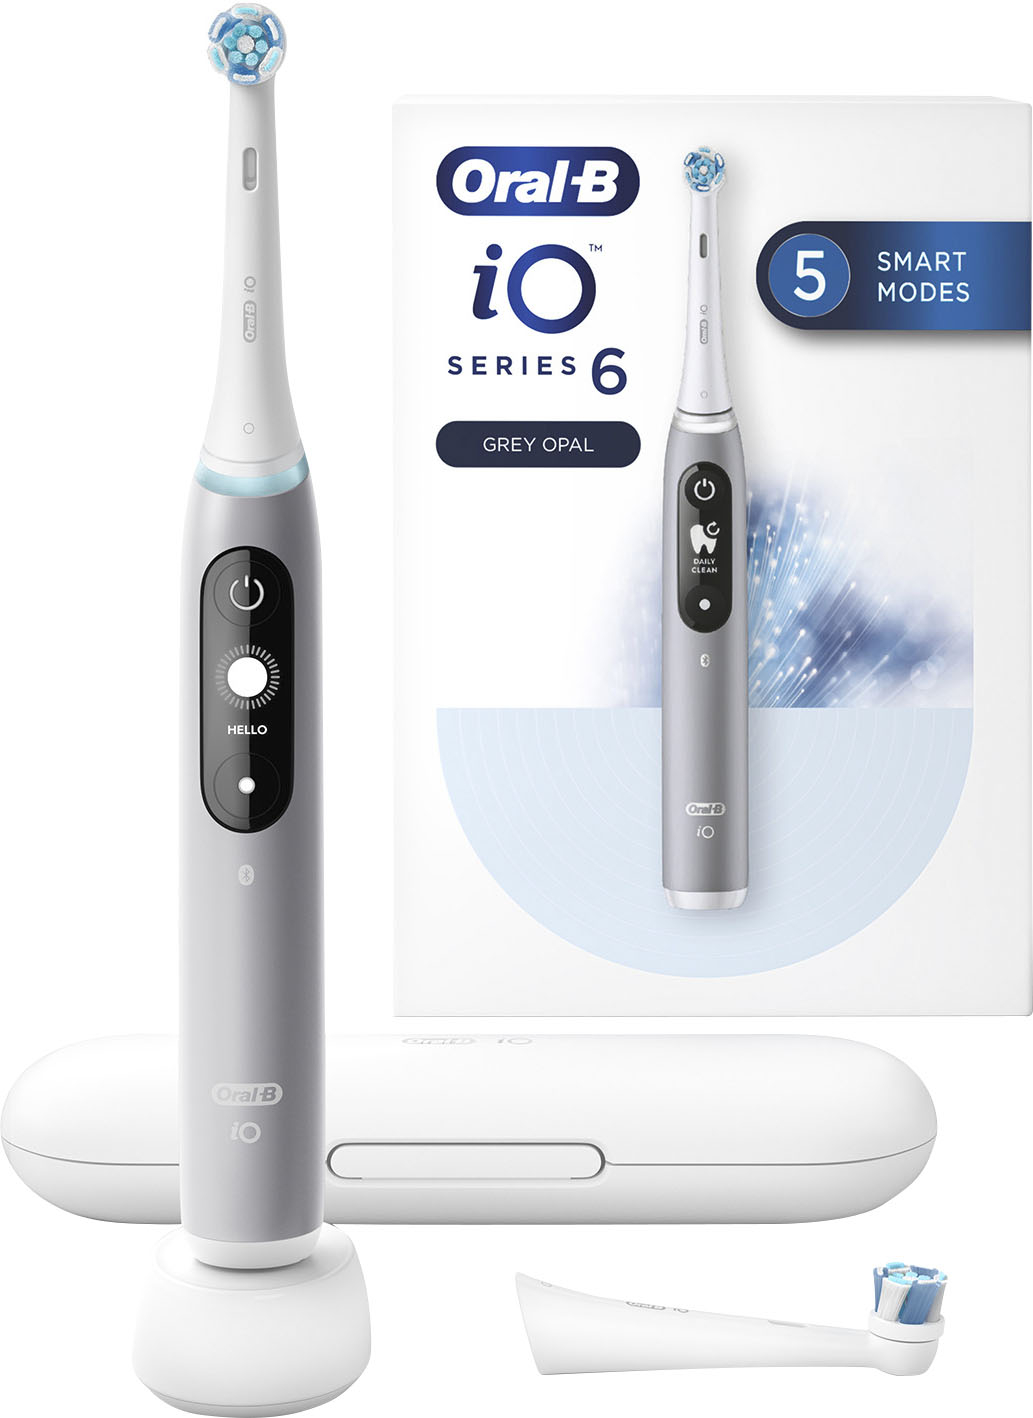 Oral-B IO Series 6 Electric Toothbrush with (1) Brush Head, Gray Opal